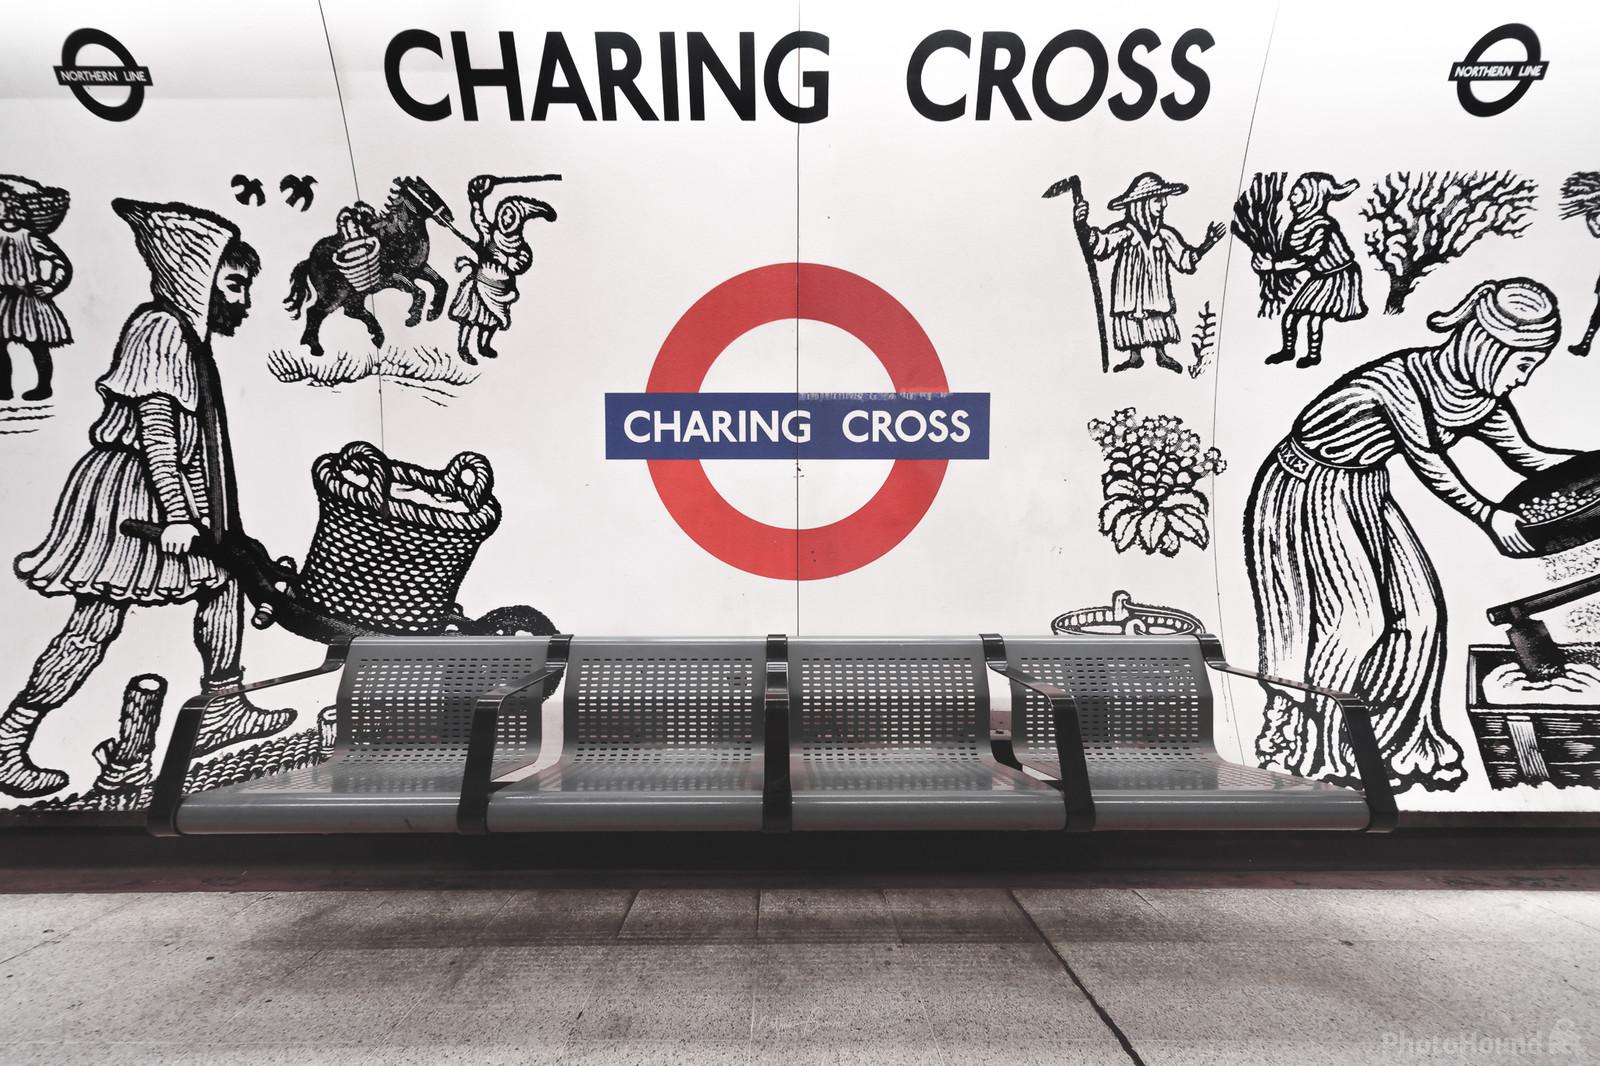 Image of Charing Cross Tube Station by Mathew Browne